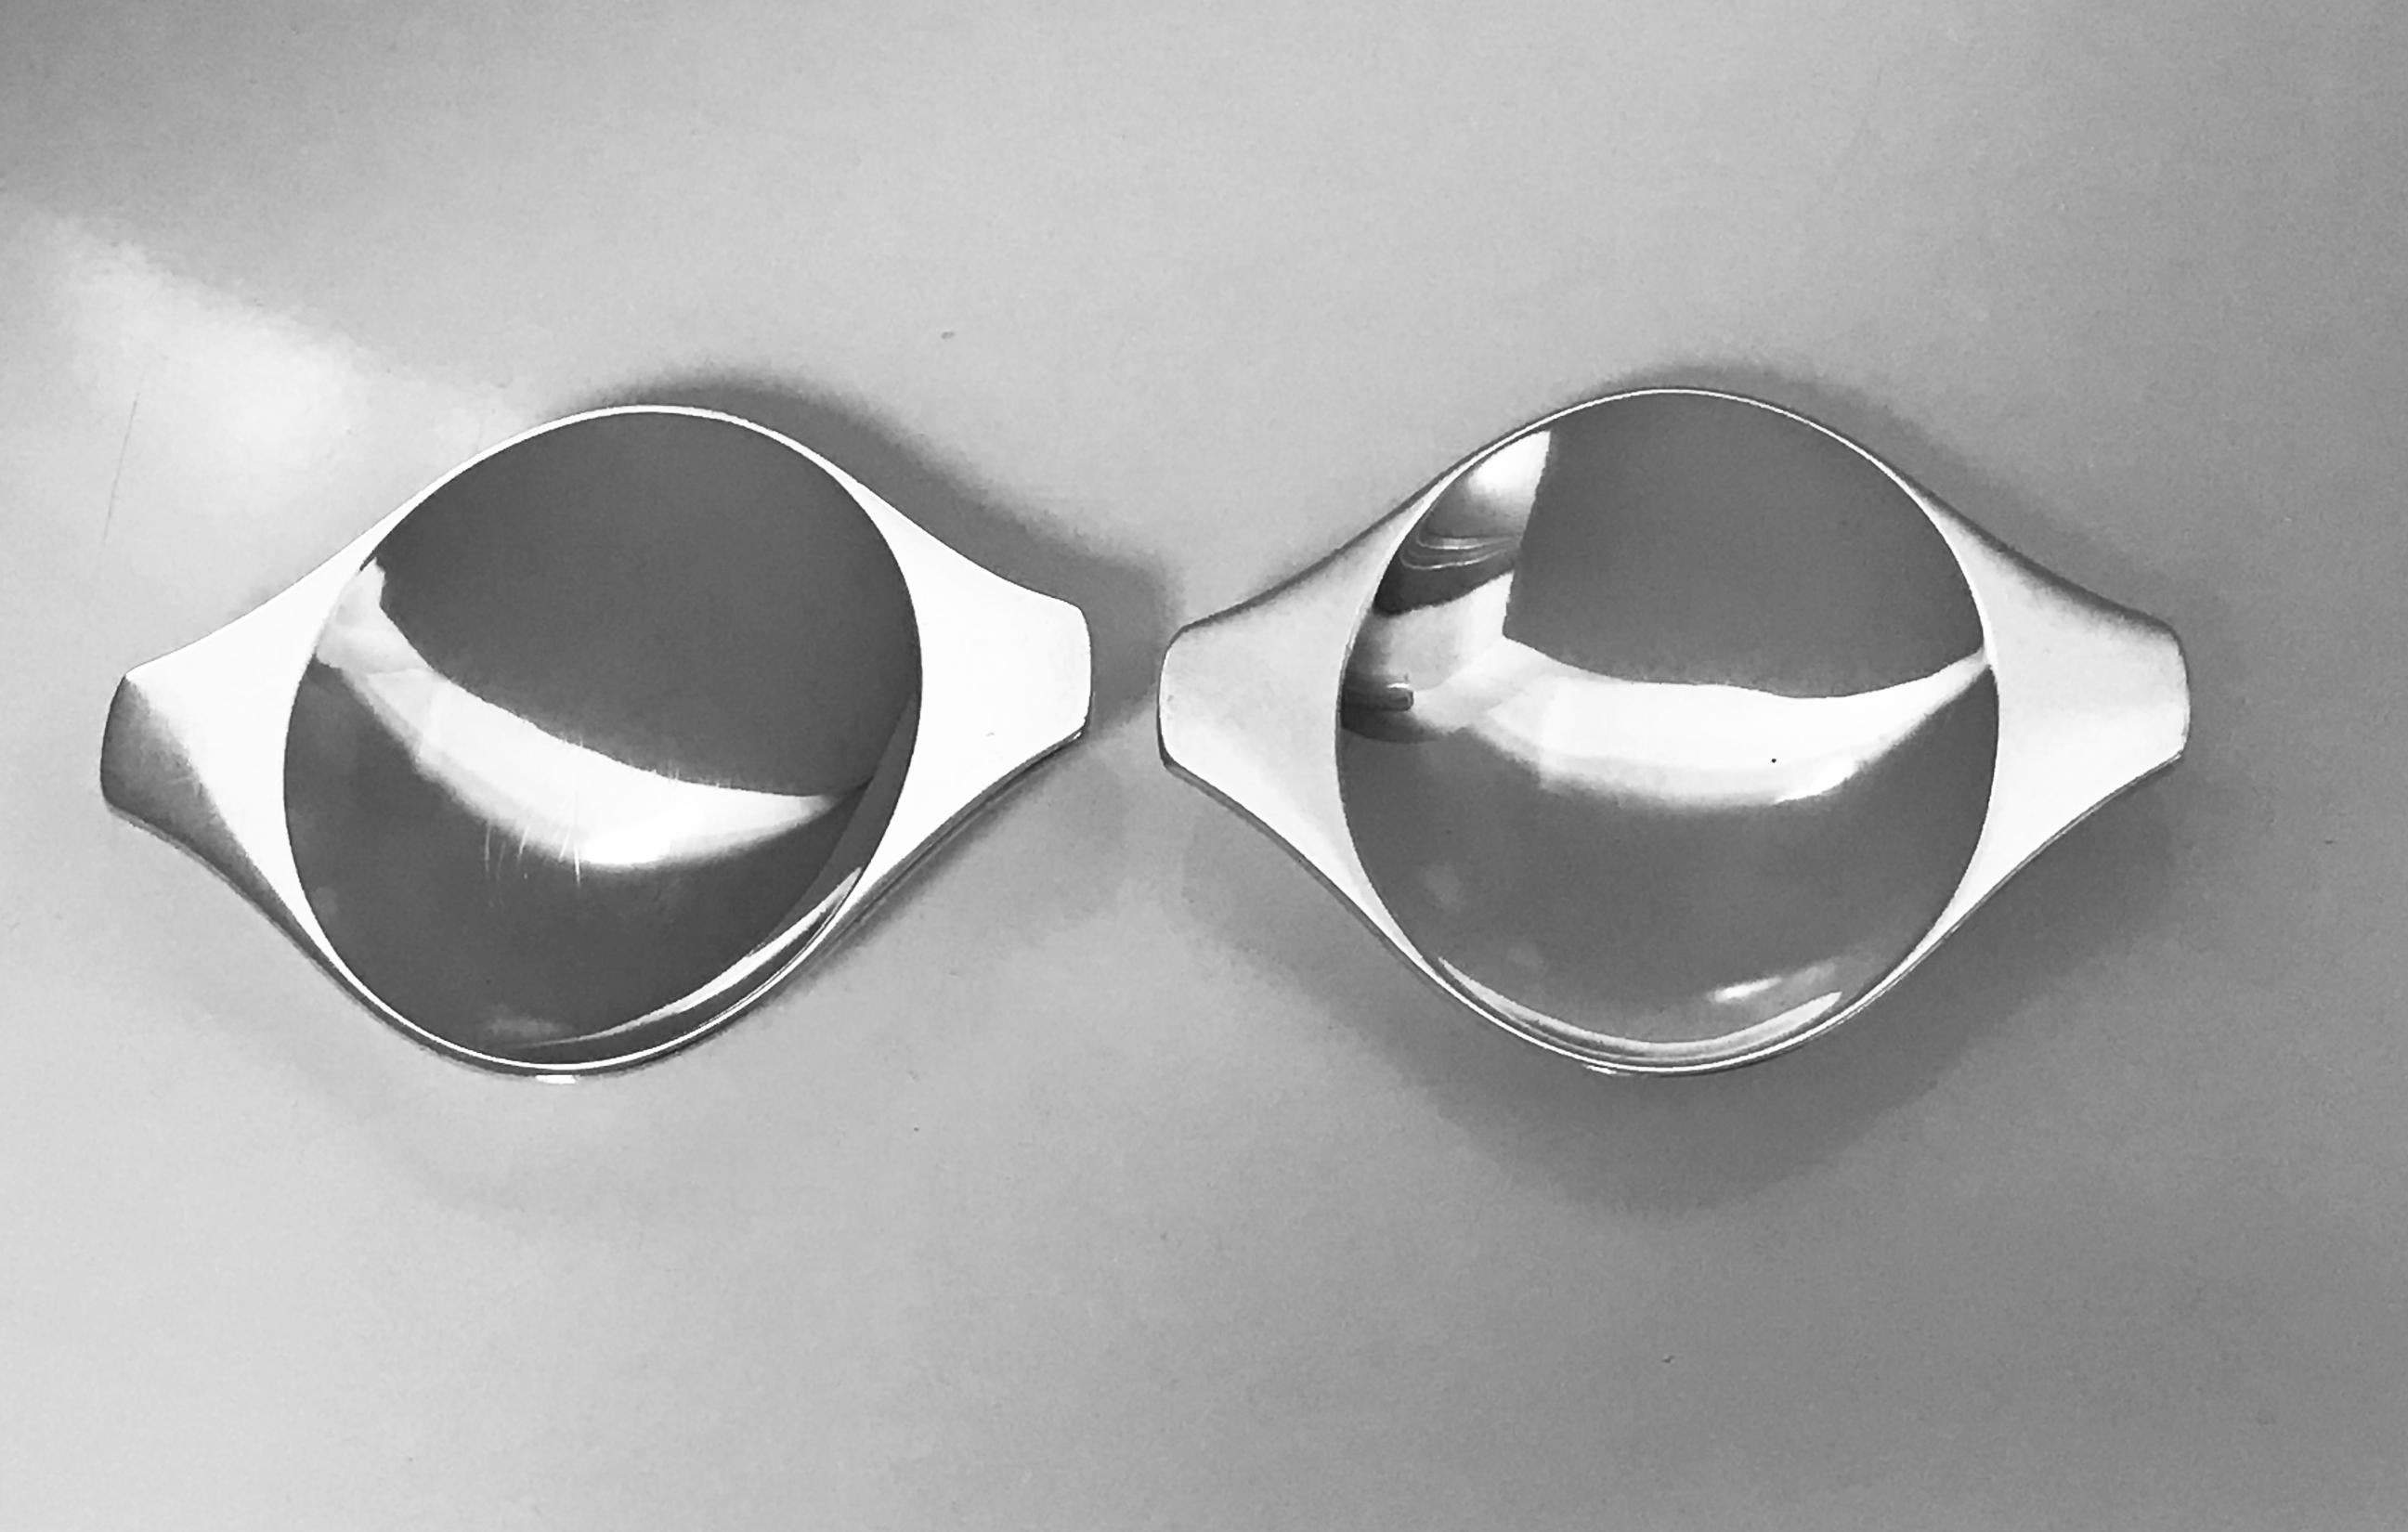 Pair of Georg Jensen Henning Koppel Danish sterling dishes, model no. 1078, post 1945 stamped marks. Measure: Length 10.5 cm (4 1/8 inches), width 8.9 cm (3 1/2 inches), total weight: 178 grams (5.70 oz). Extreme minor wear, commensurate with age,